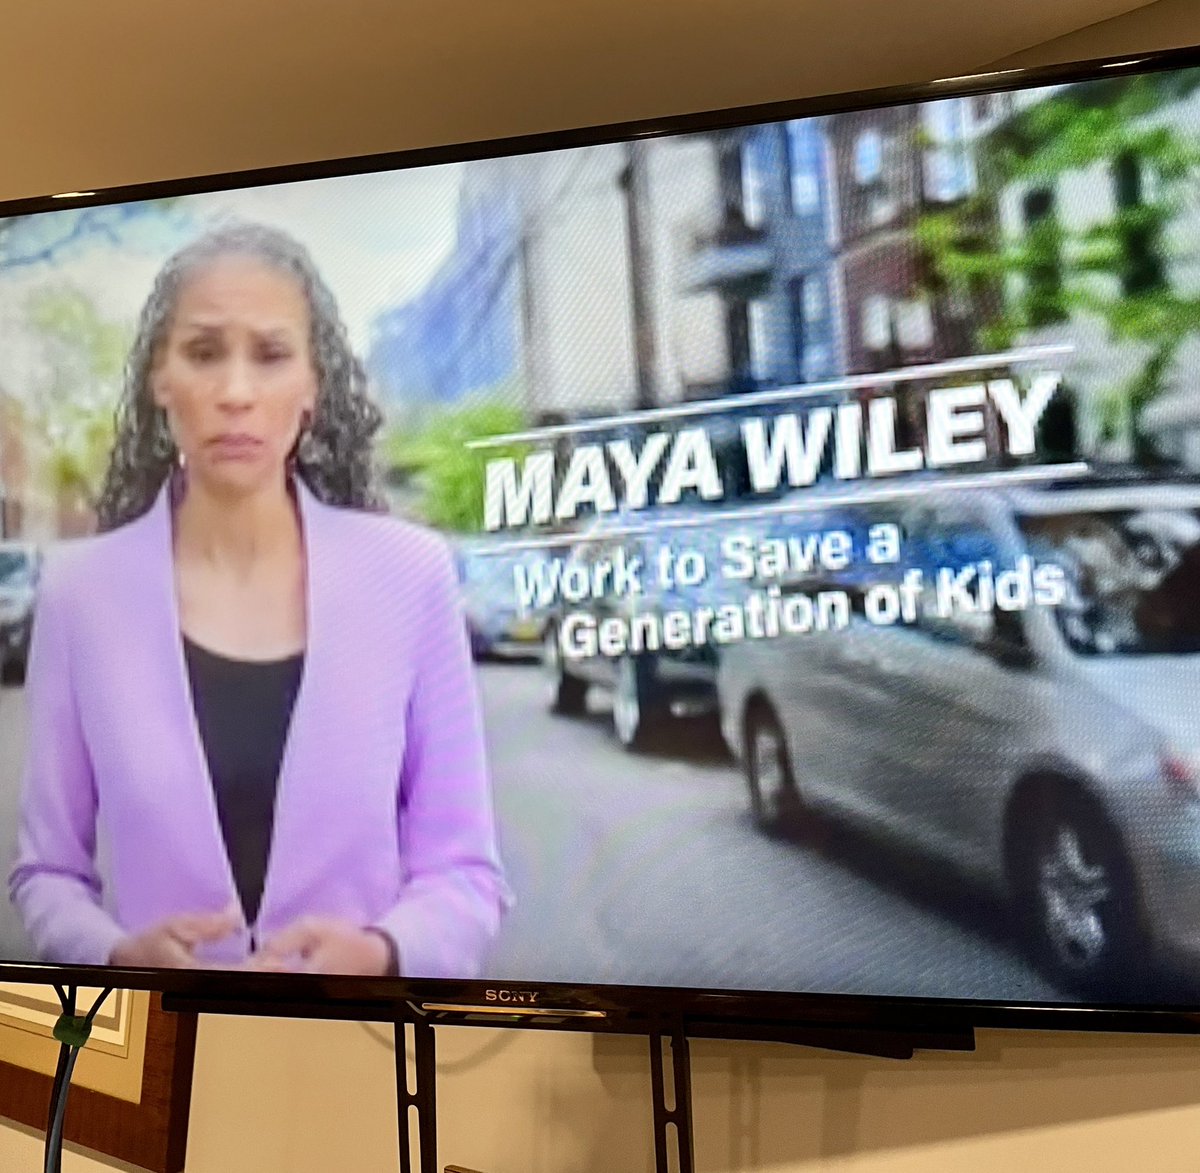 Girlfriend, you have as much chance pulling in one vote from @OANN viewers as I have picking 6 Powerball numbers. @mayawiley https://t.co/yNblJAEJqE